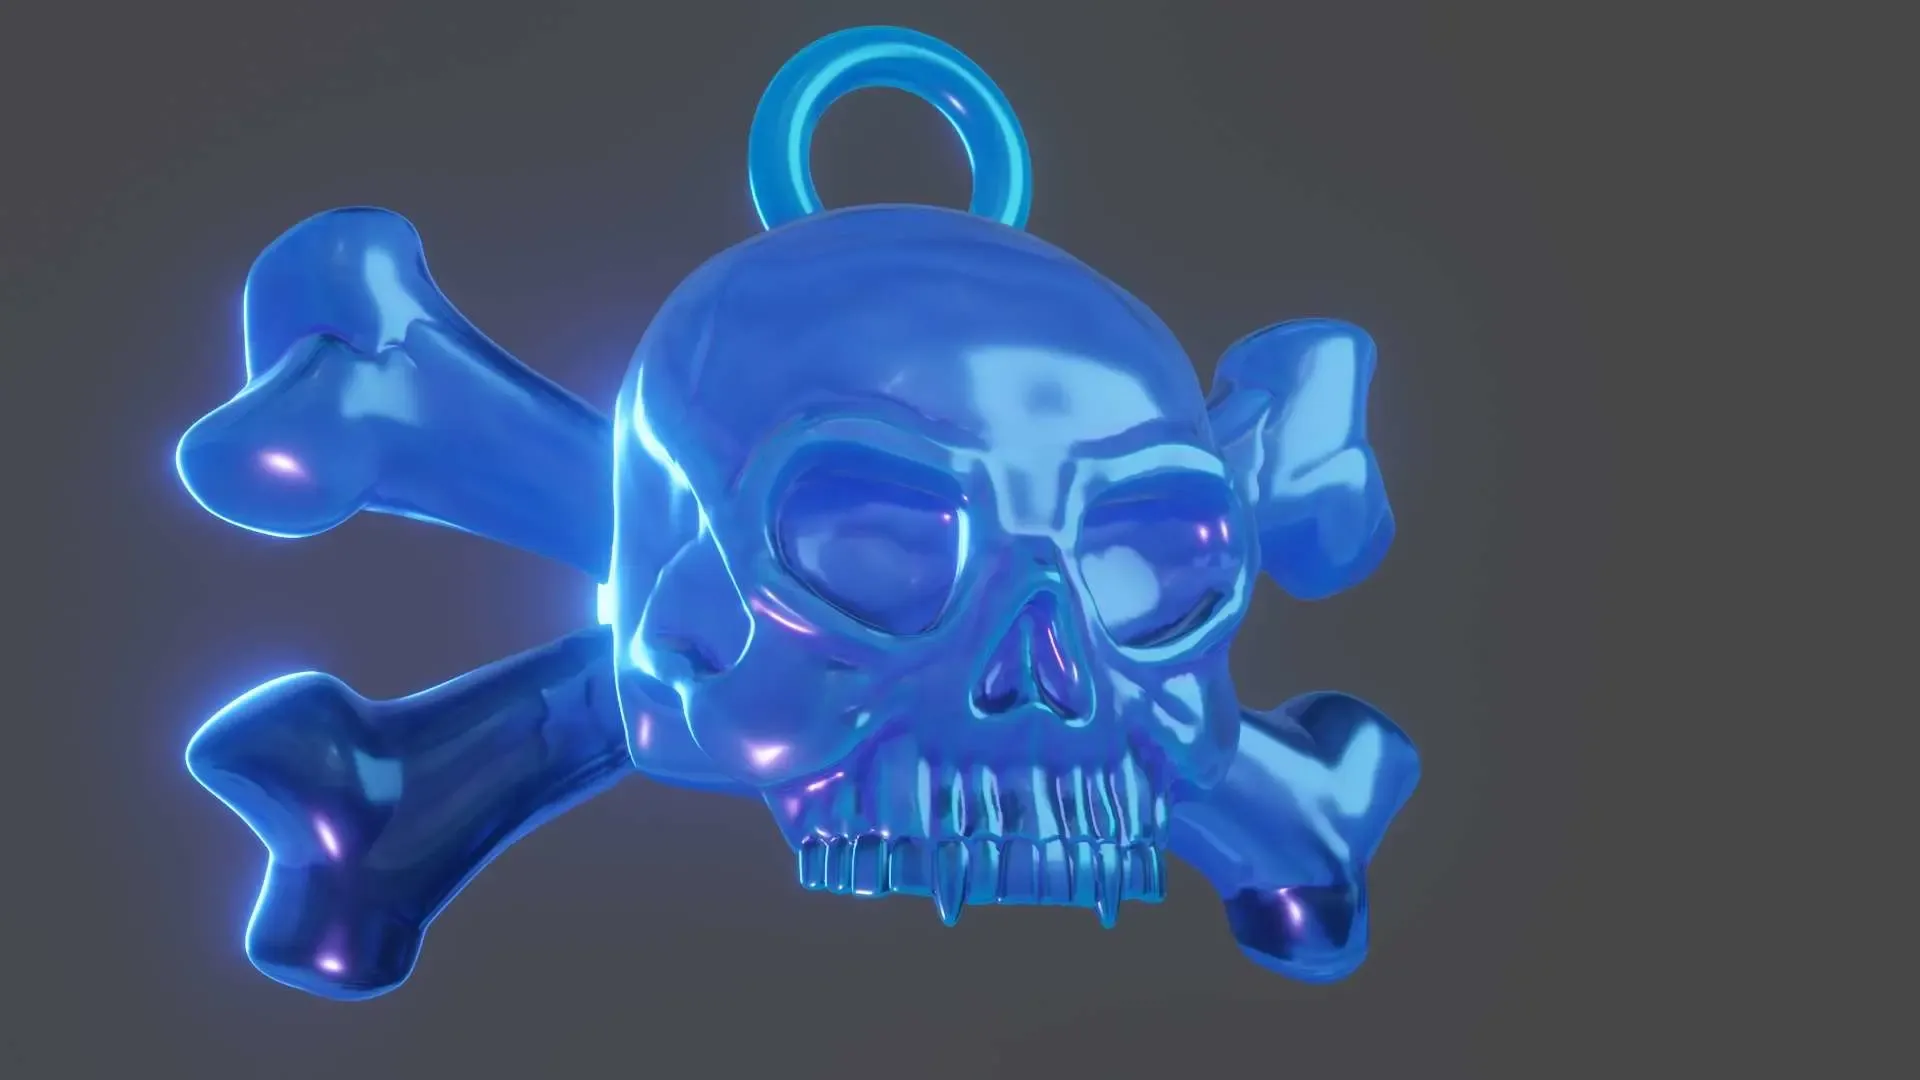 Pirate Skull Pendant for Liontin or Keychain